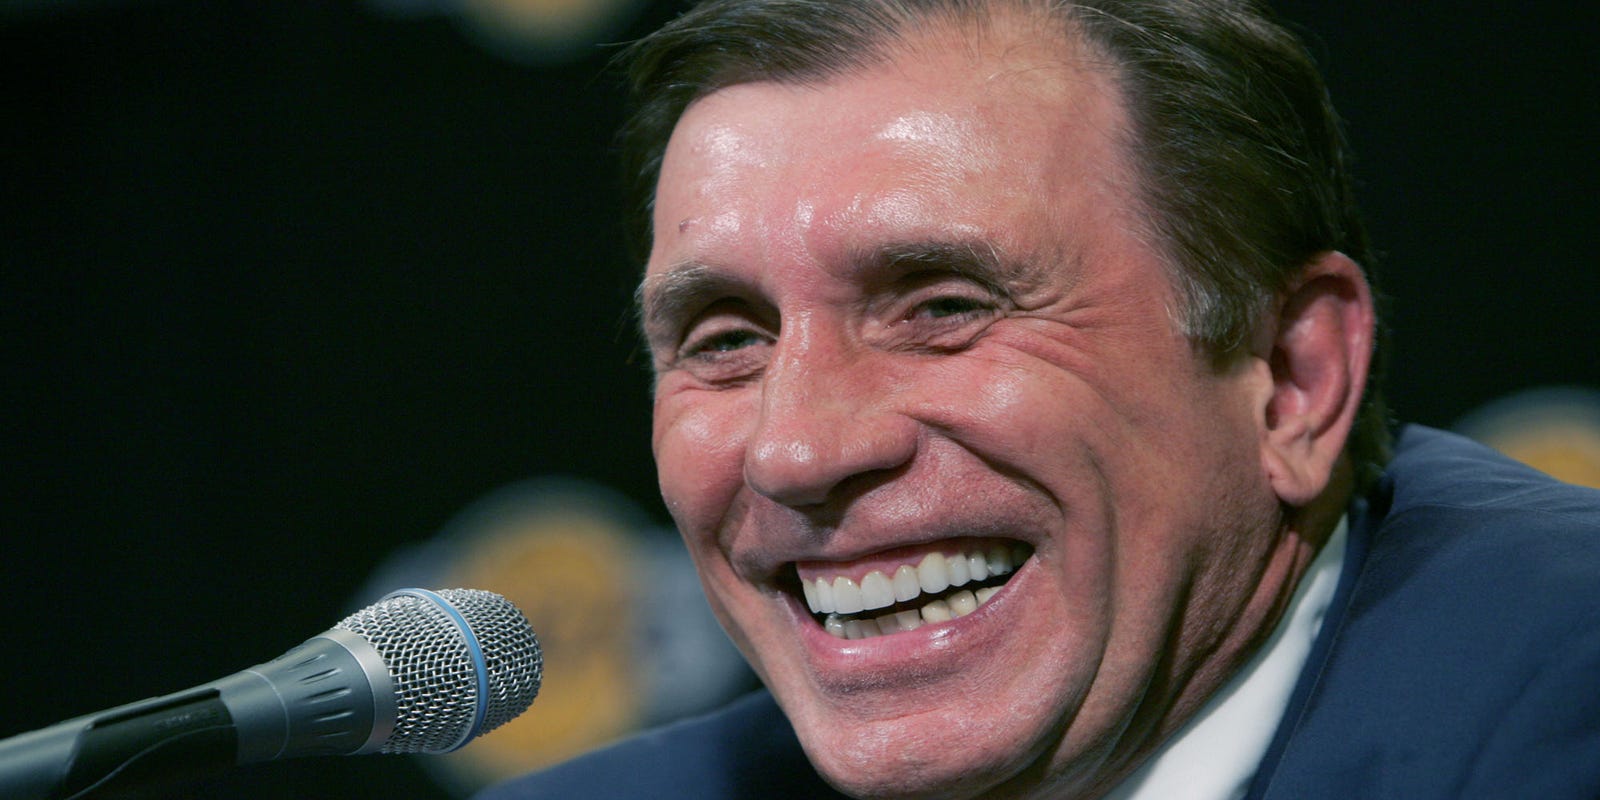 Michigan legend Rudy Tomjanovich elected into Basketball Hall of Fame